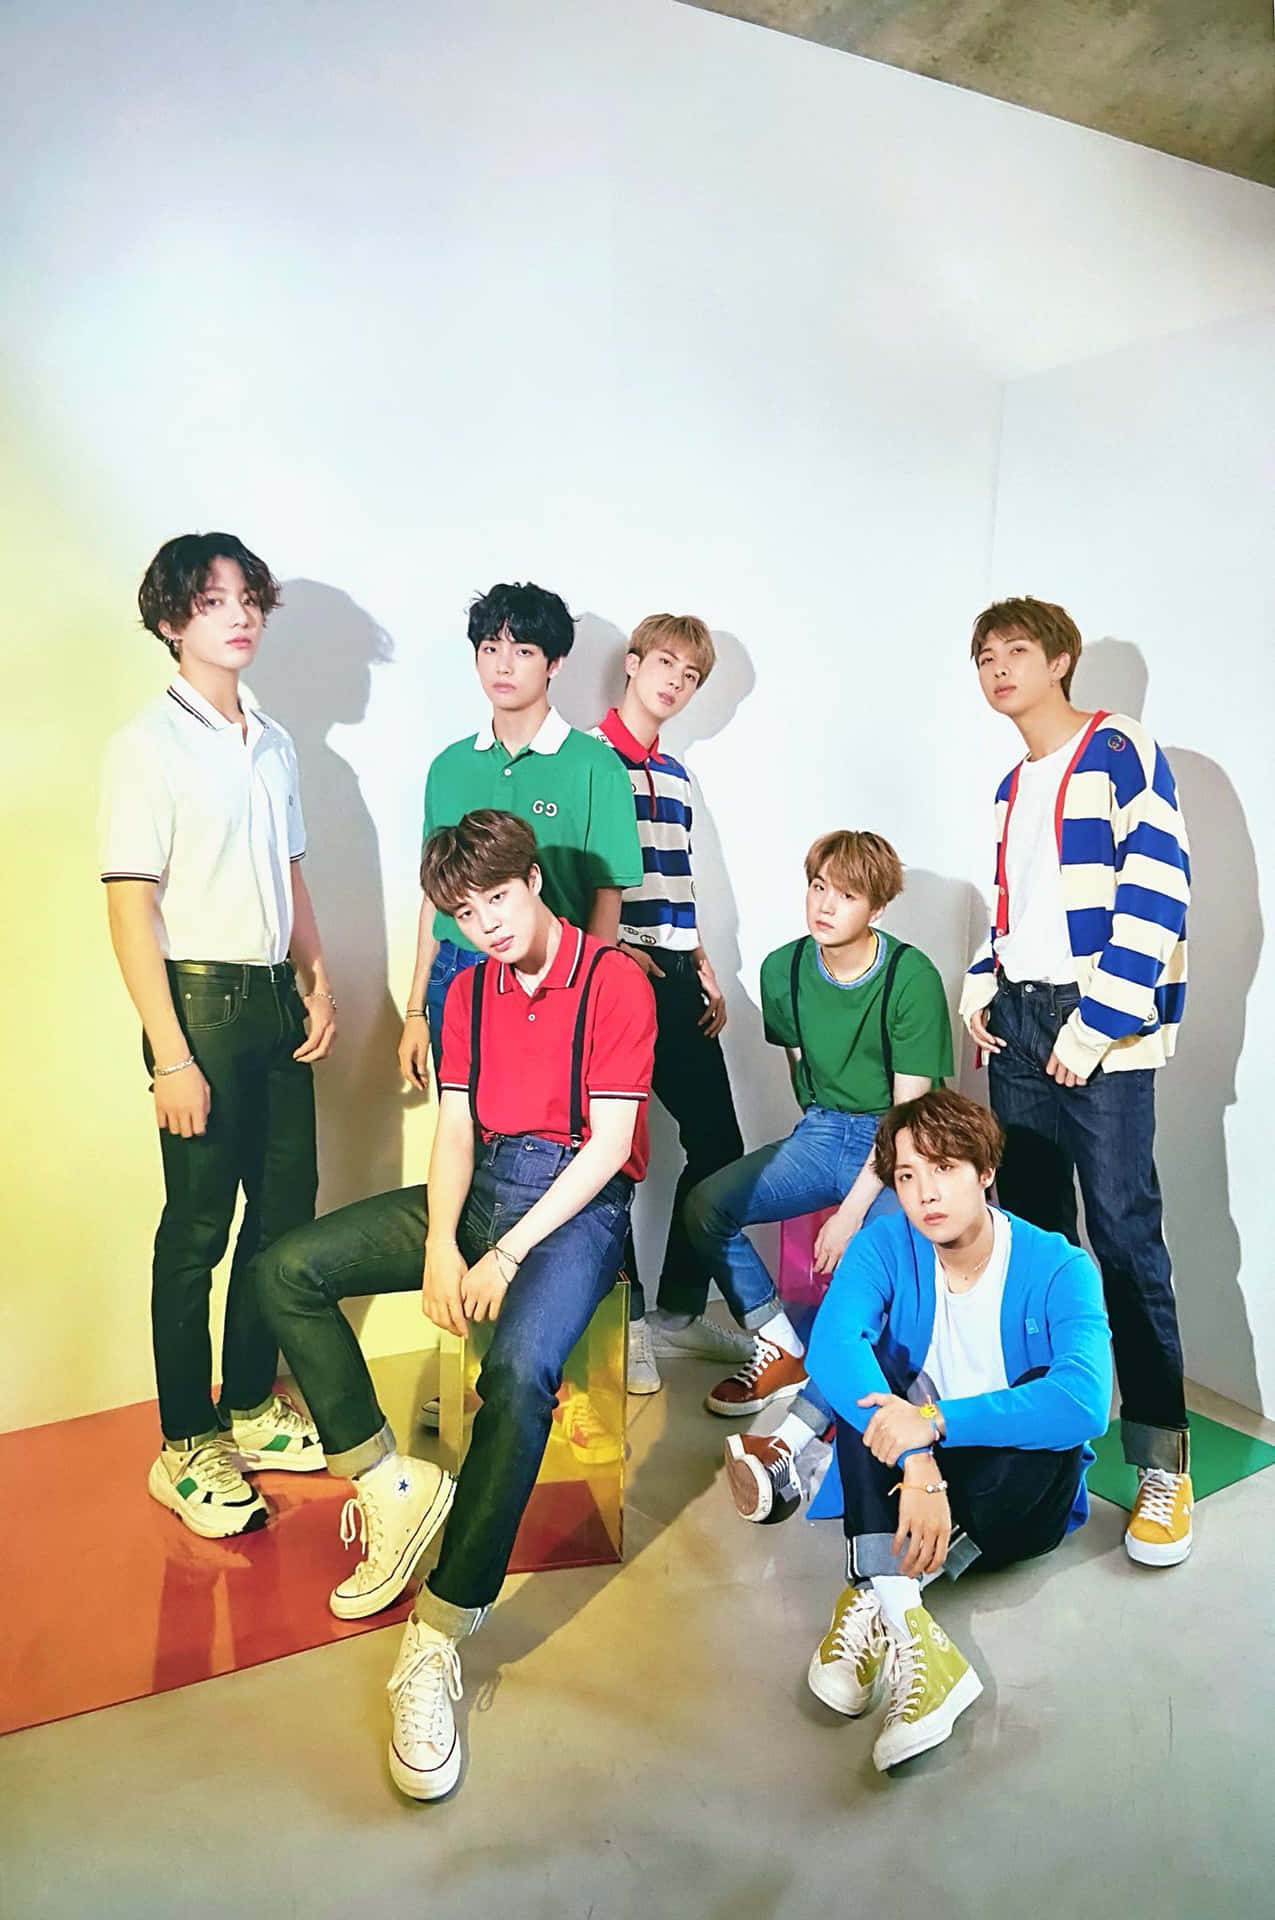 Bts Photoshoot In Casual Outfits Background